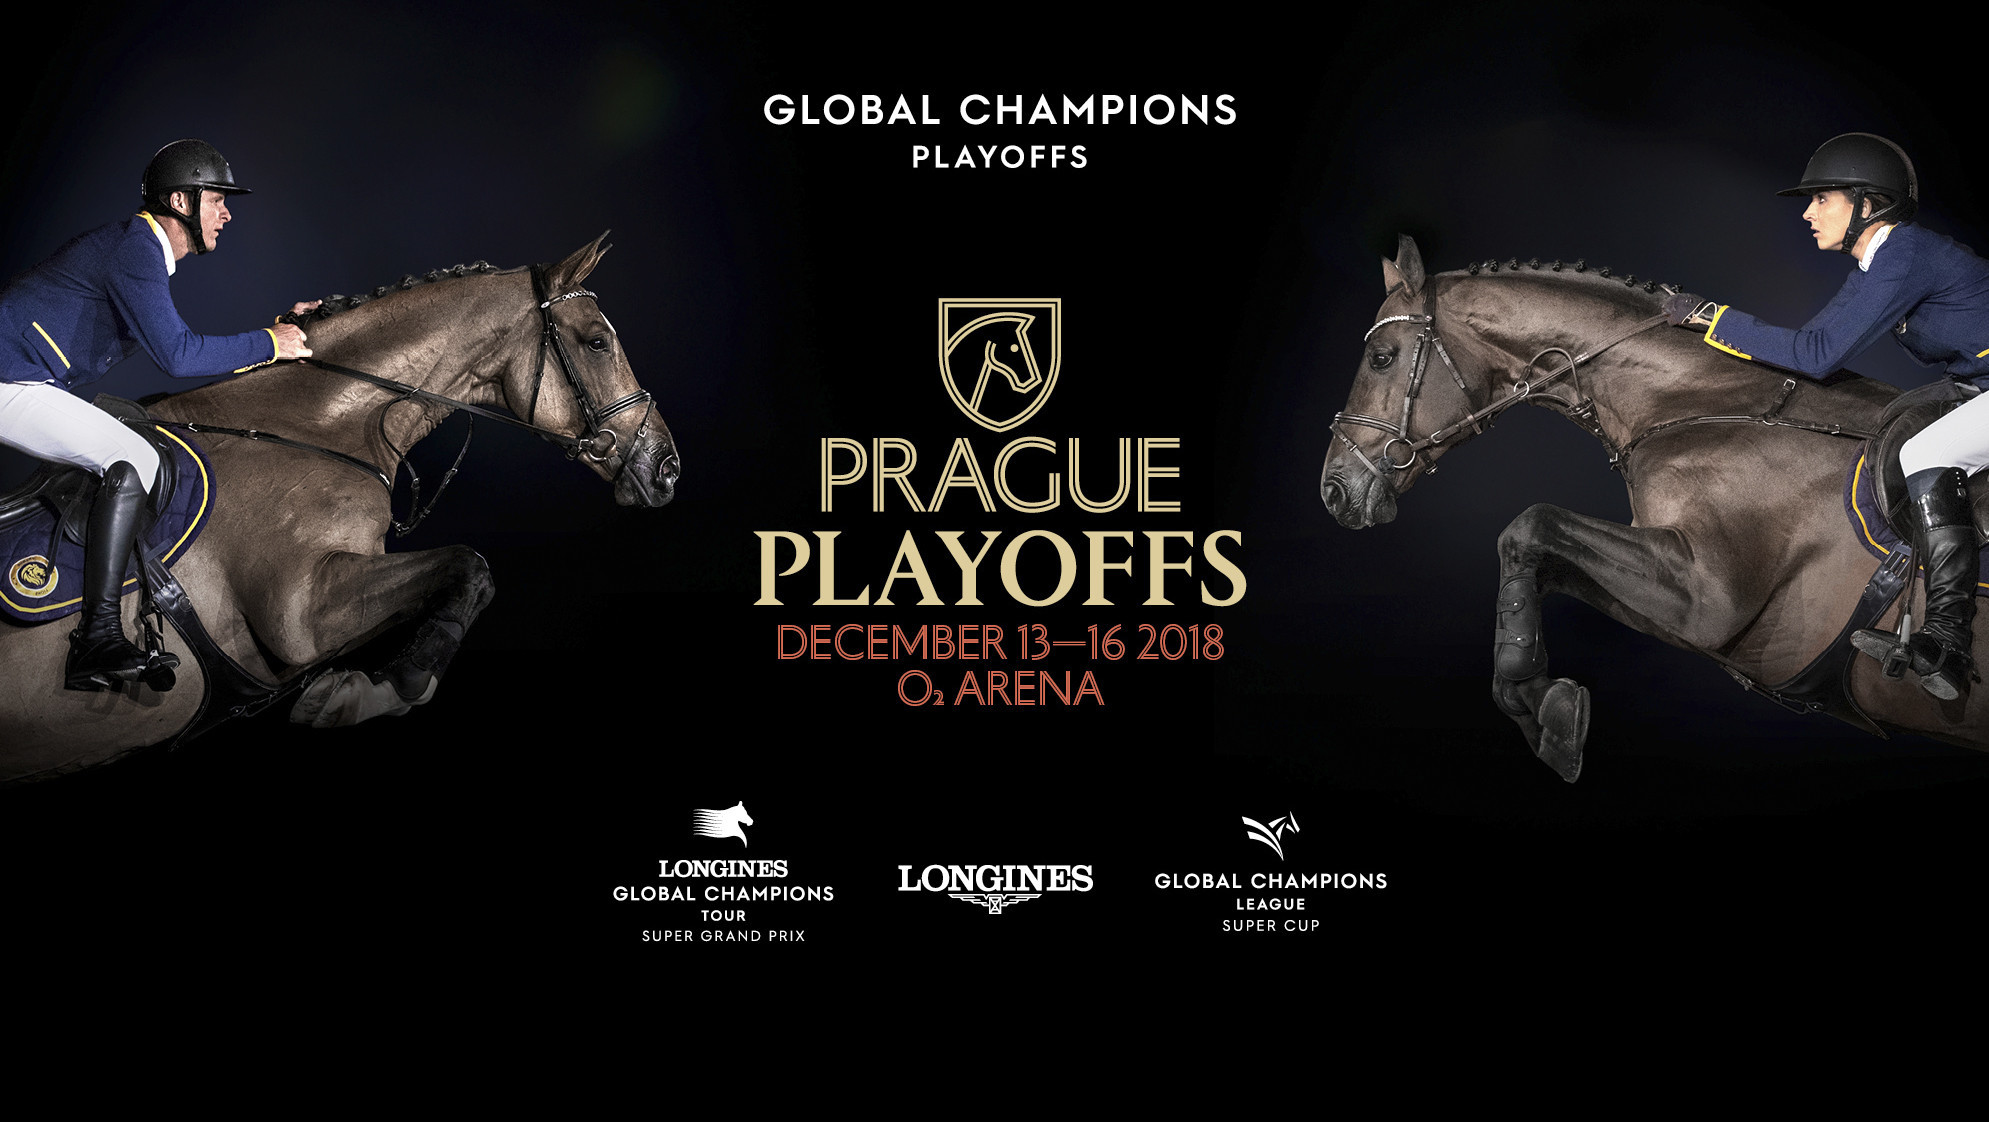 Prague braced for first Longines Global Champions Tour play-offs